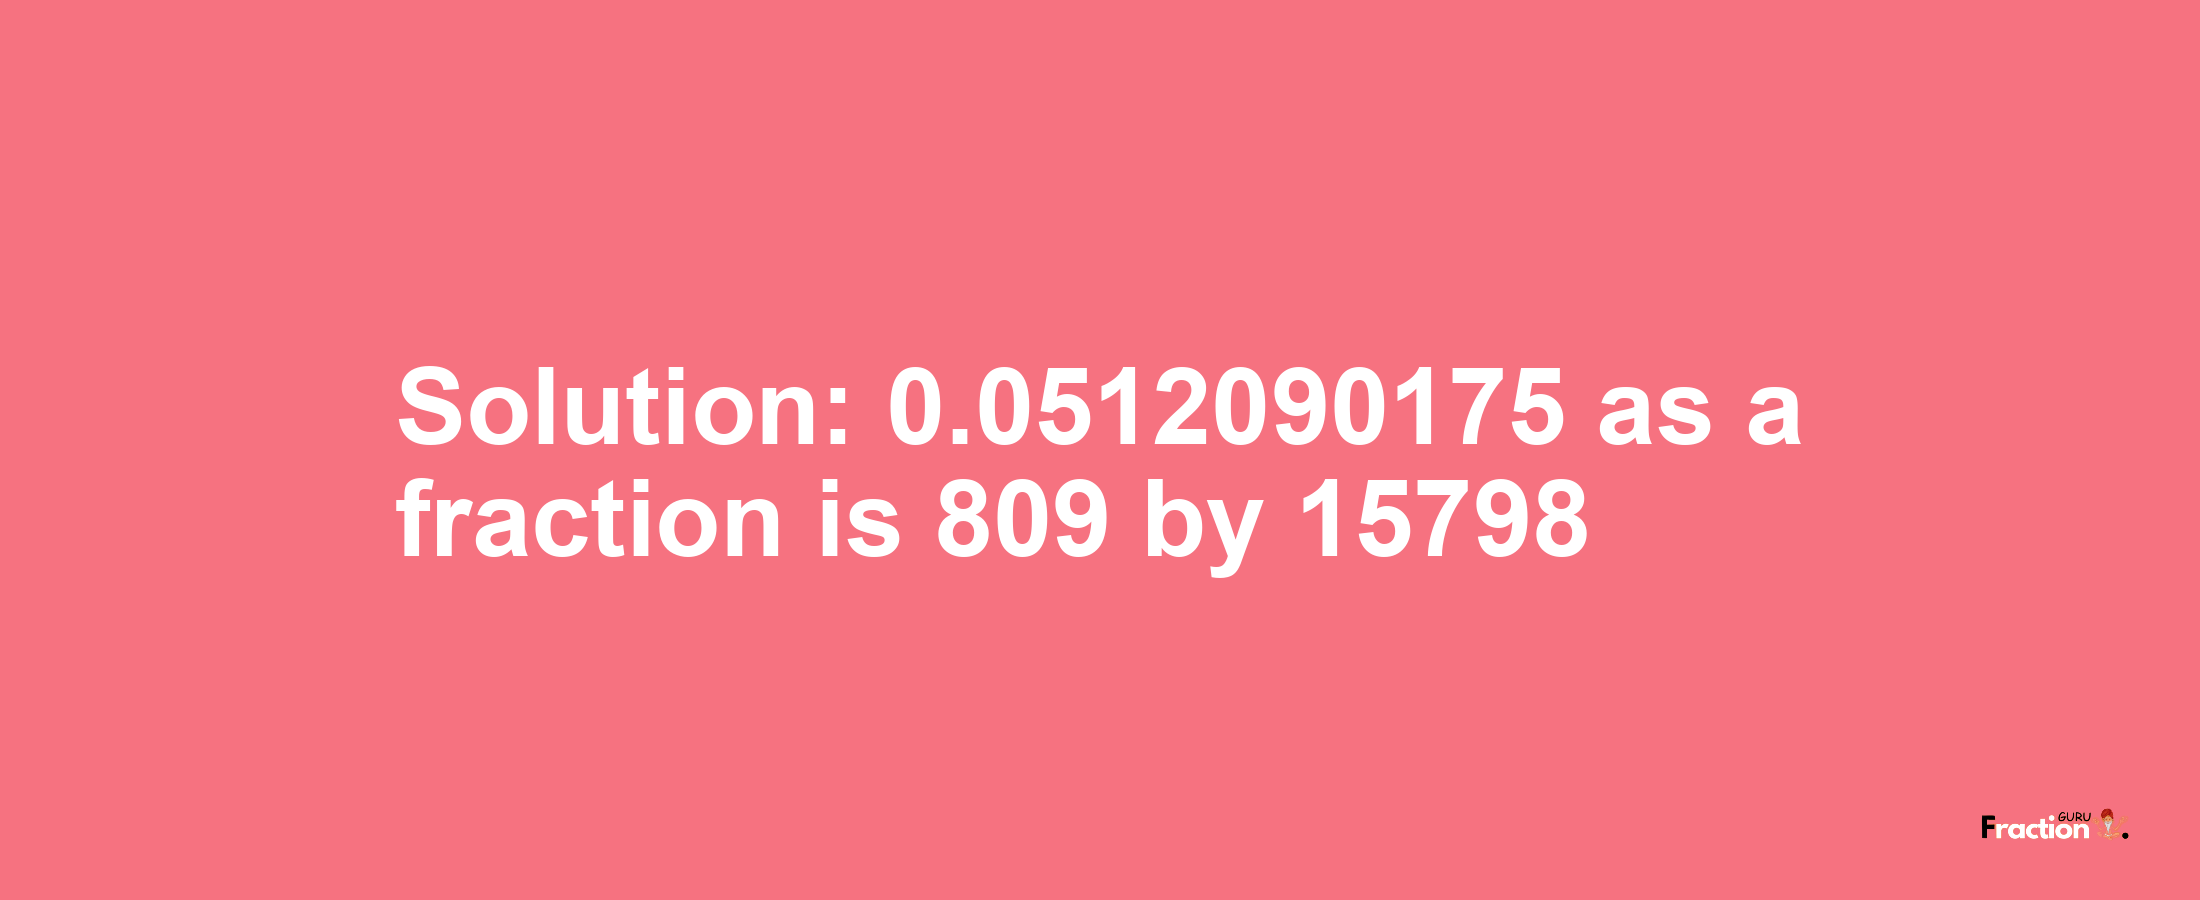 Solution:0.0512090175 as a fraction is 809/15798